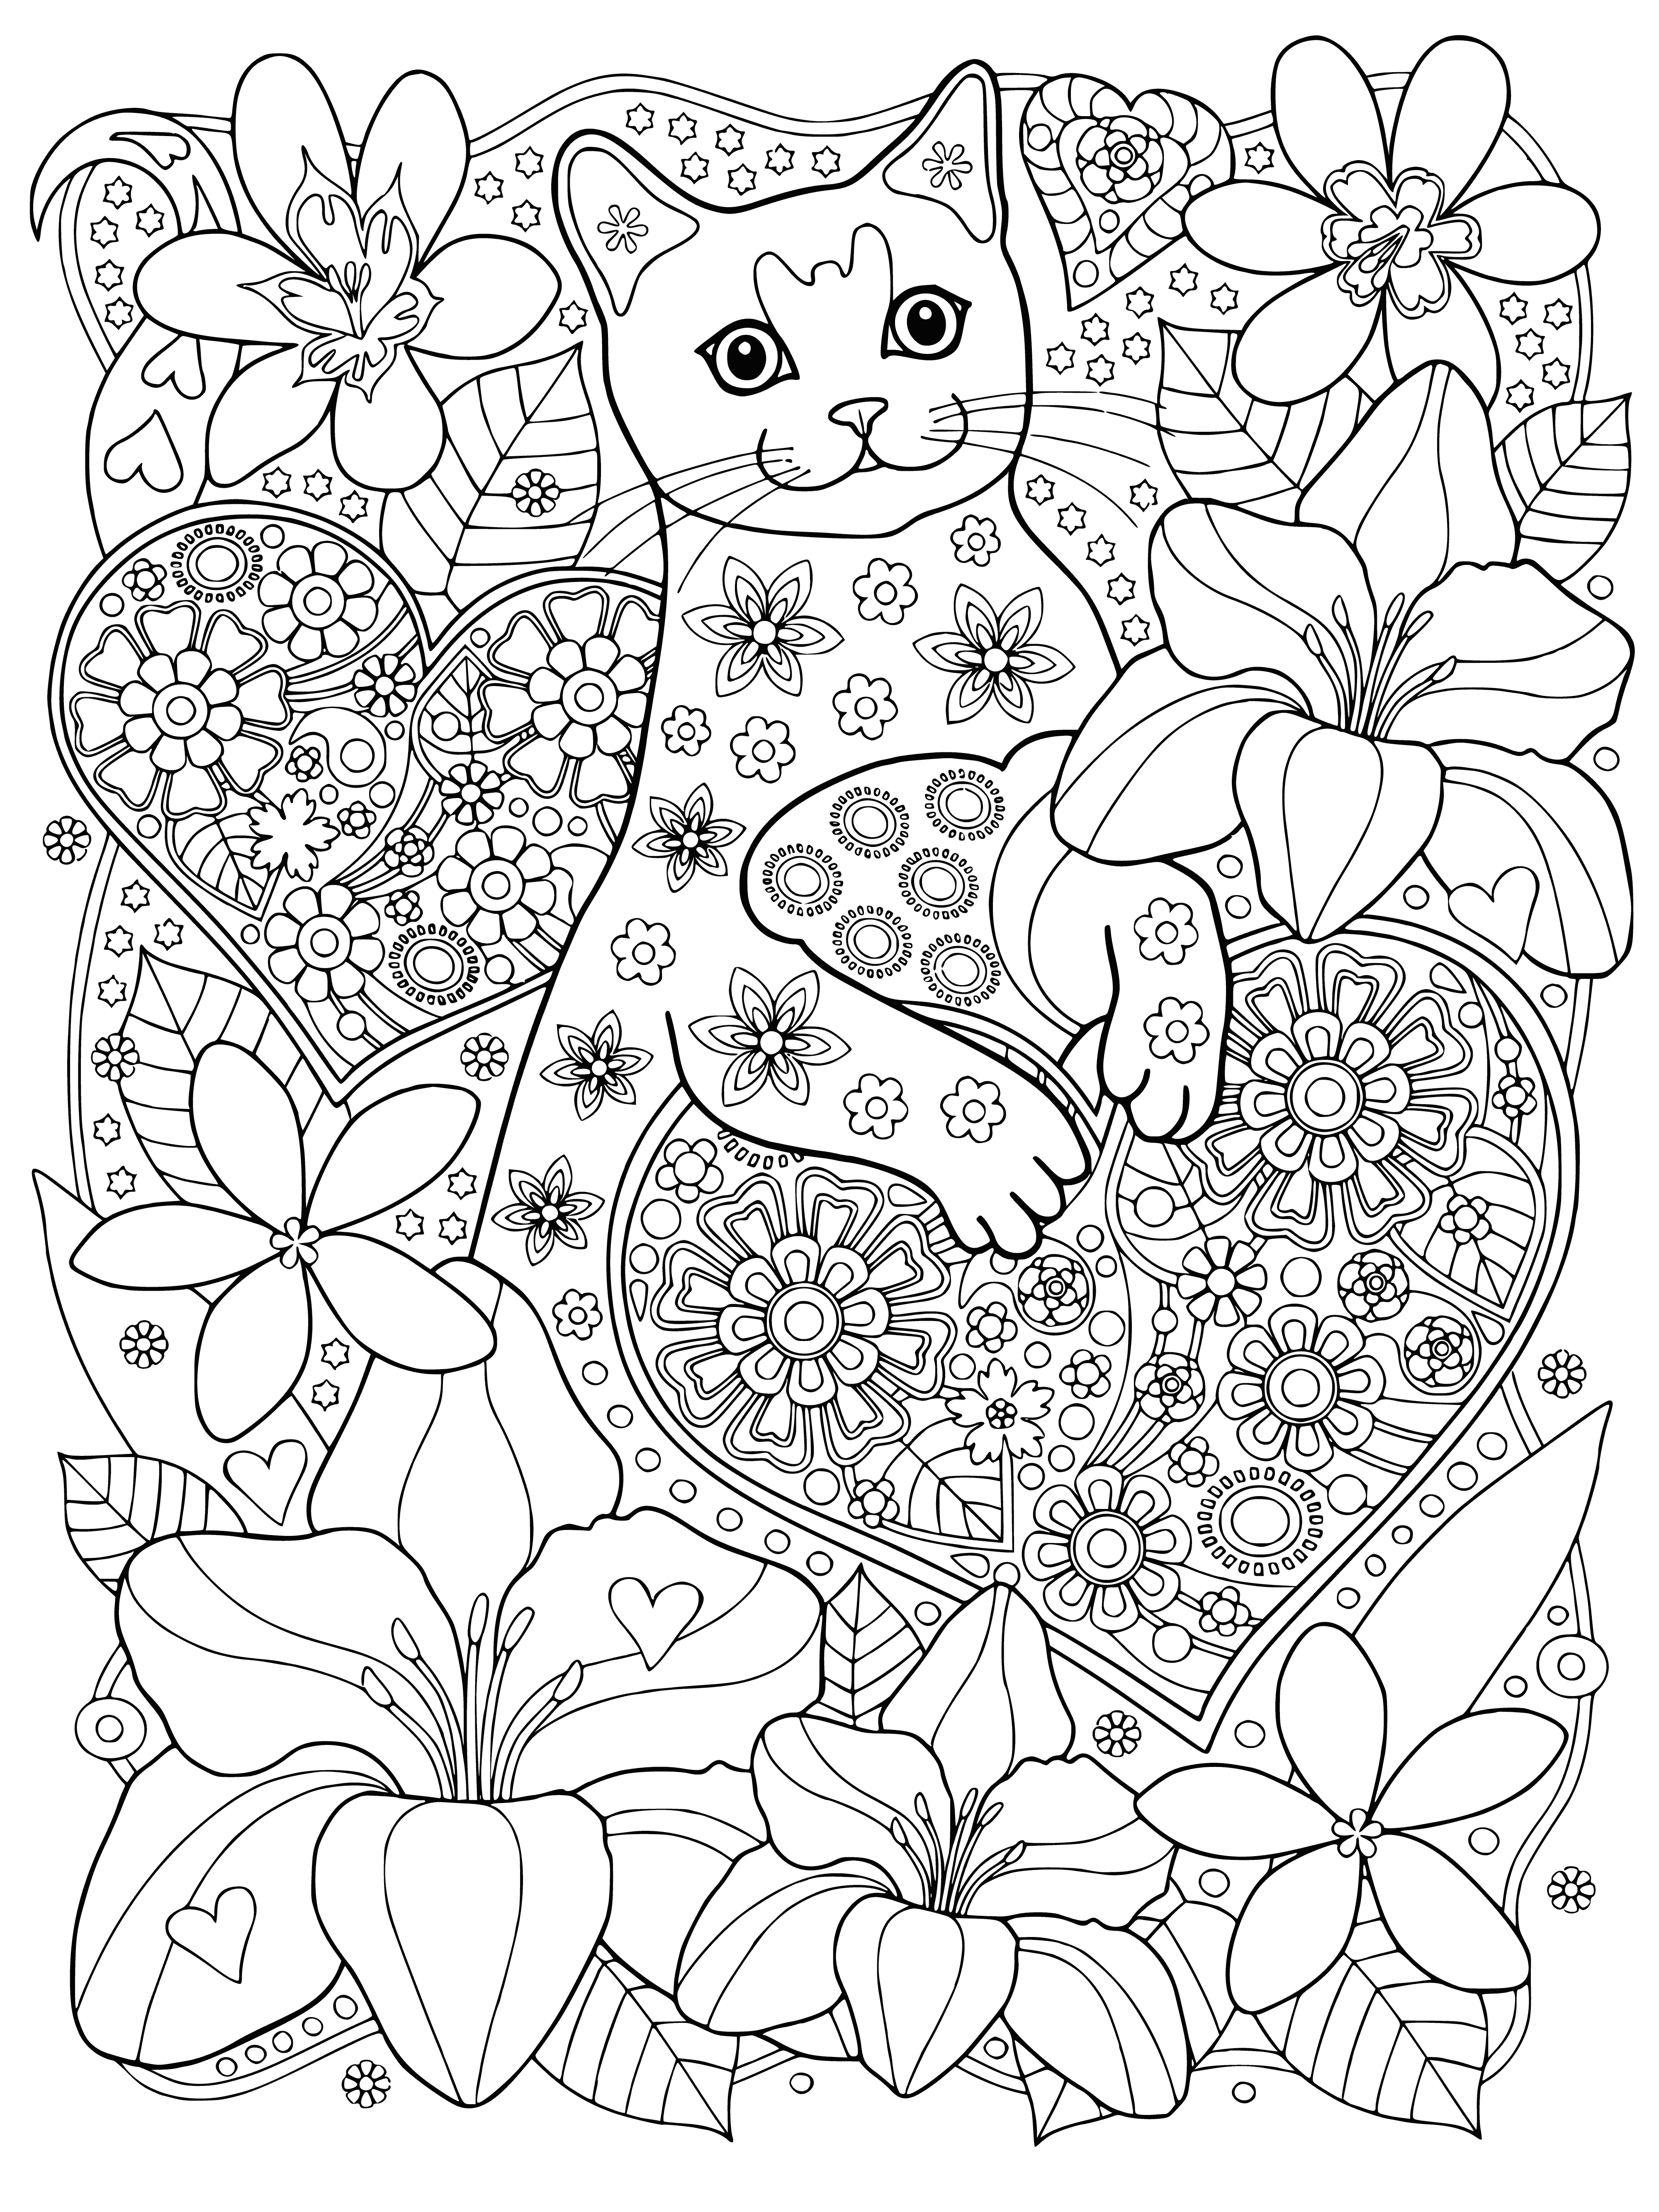 coloring page: Cat rests on windowsill with red heart valentine in paw, like it's saying "meow" to the world.